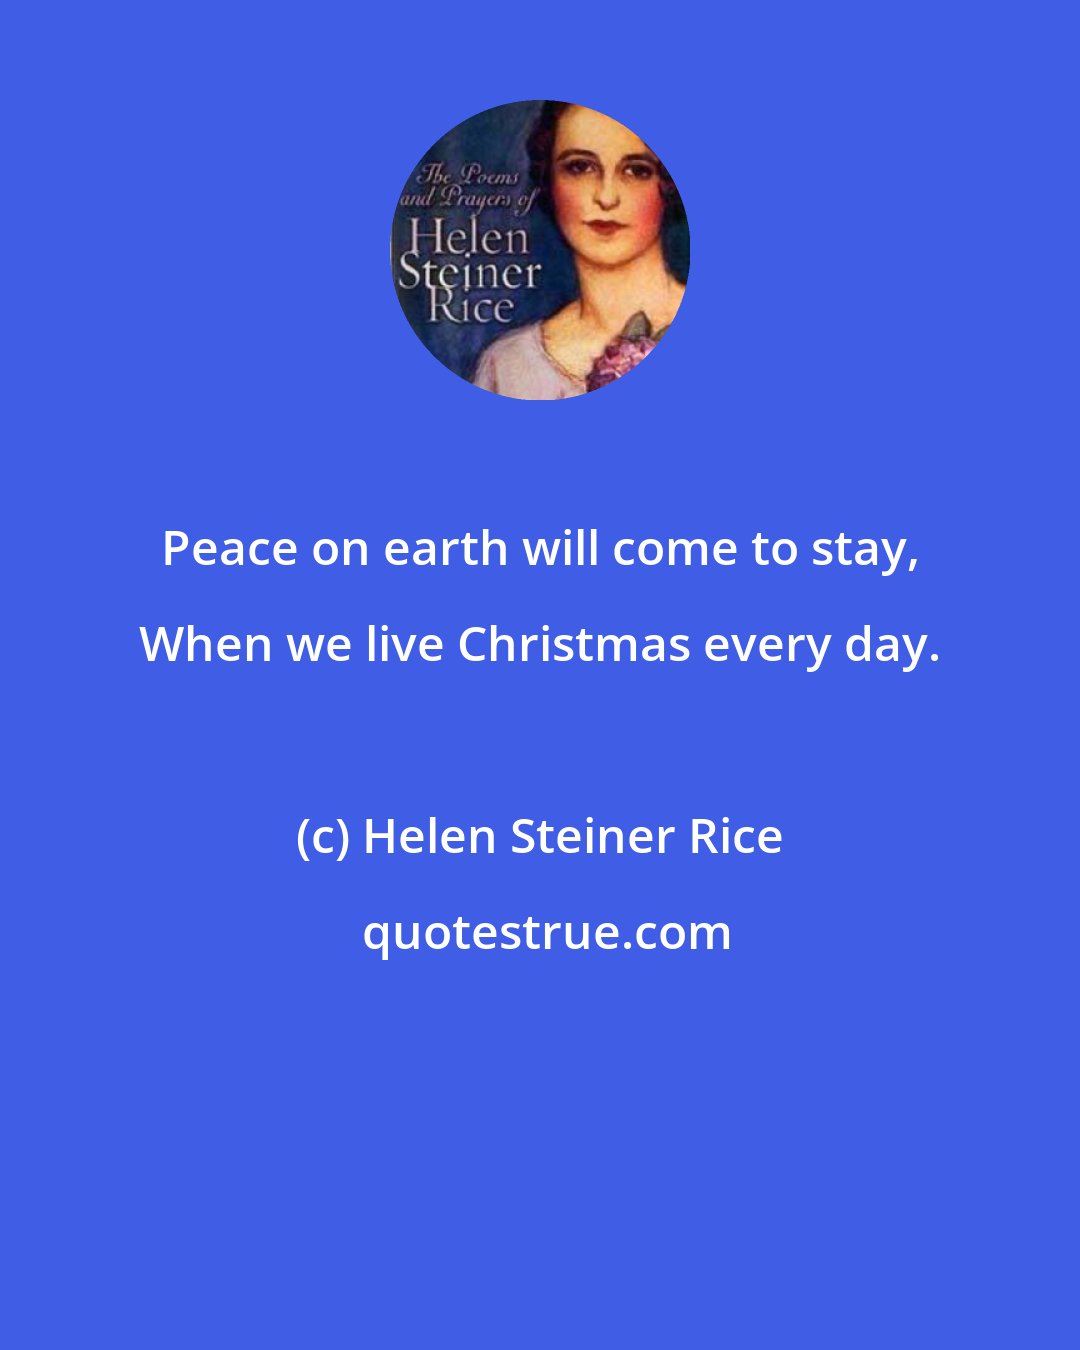 Helen Steiner Rice: Peace on earth will come to stay, When we live Christmas every day.